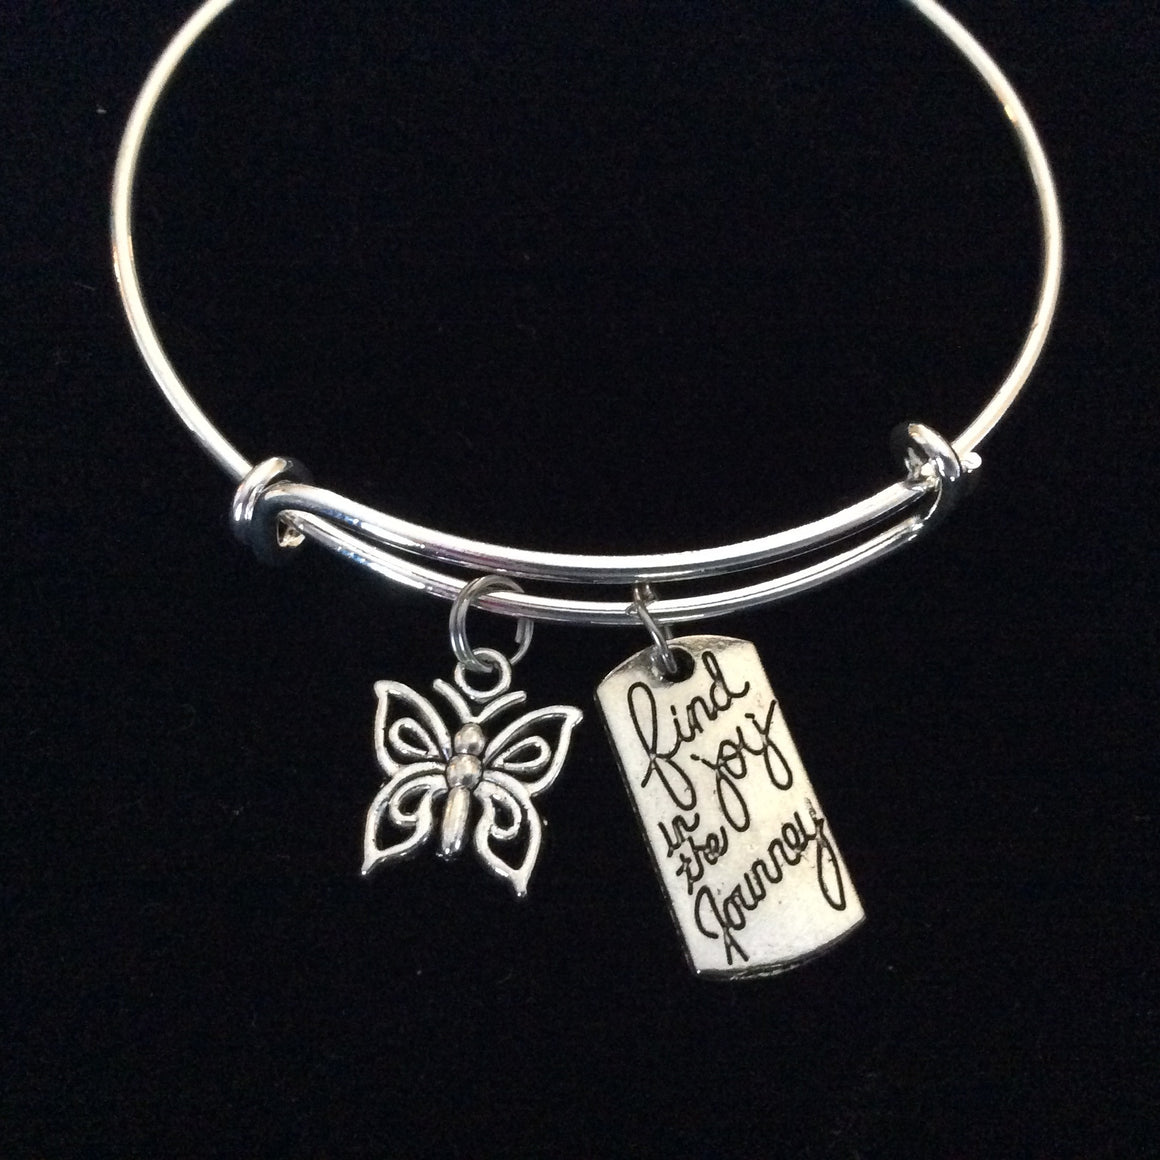 Find Joy in The Journey with Silver Butterfly Charm Adjustable Expandable Wire Bangle